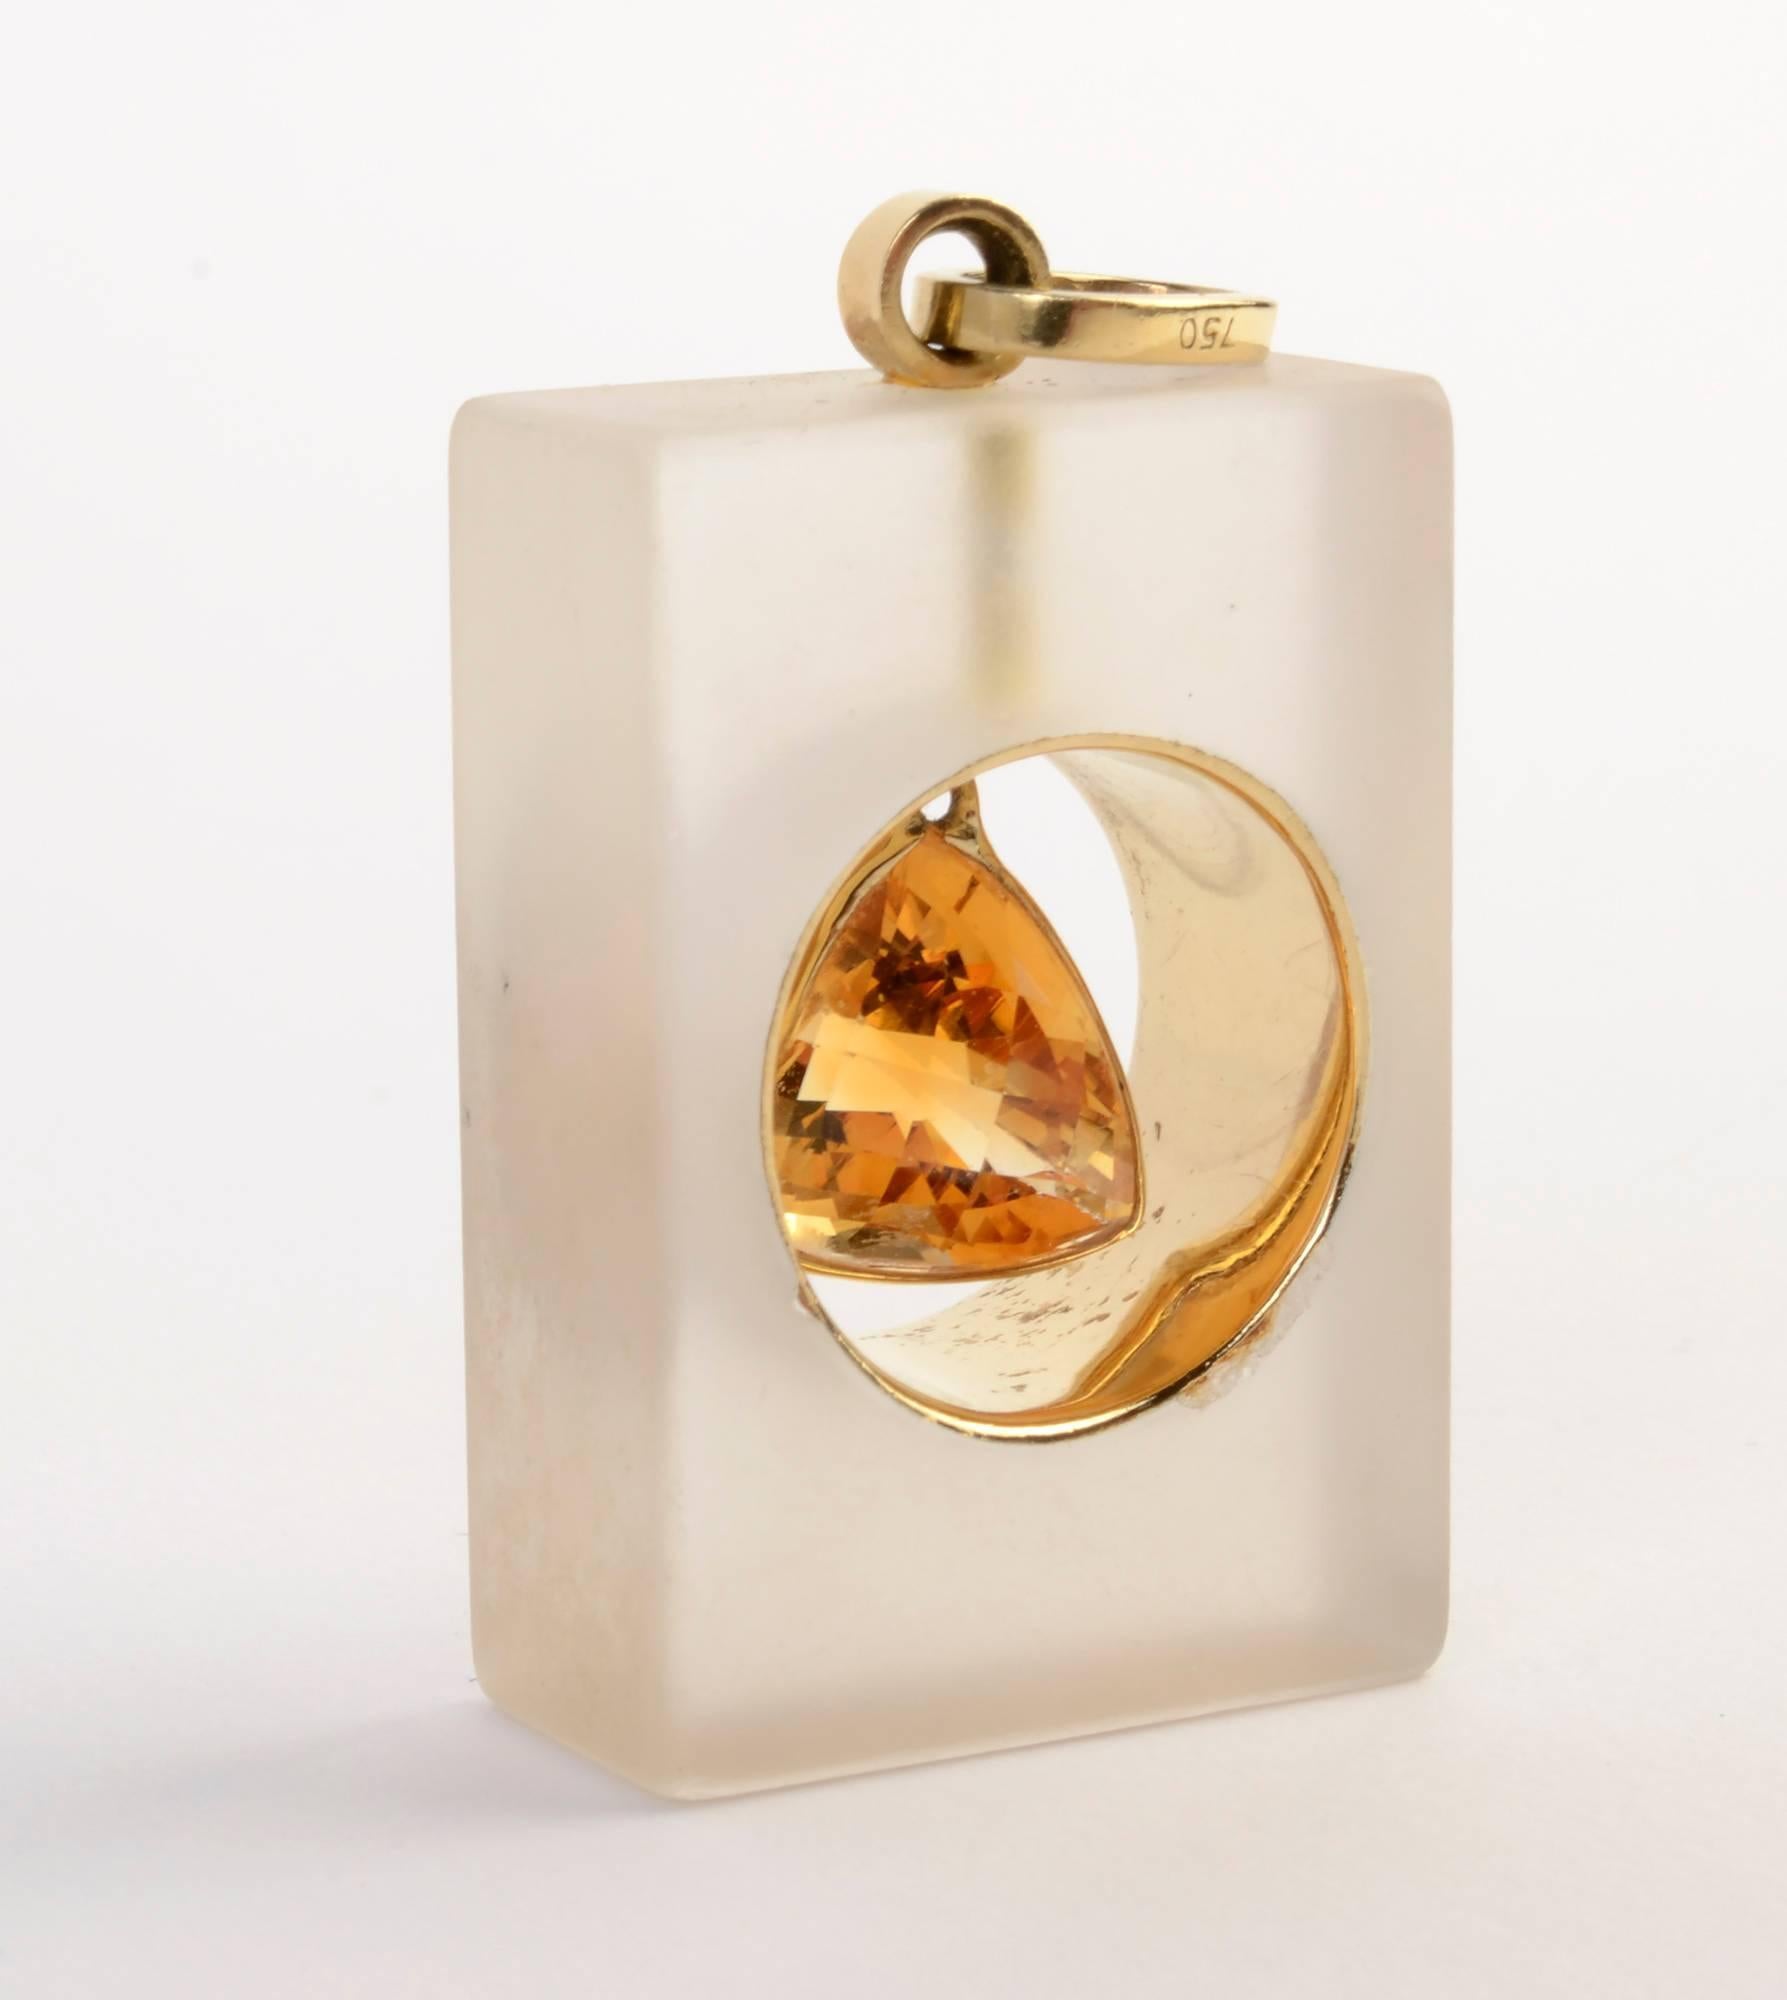 Unusual pendant in which a triangular, faceted citrine is suspended within a band of gold. The band is set within a rectangle of frosted crystal measuring 1 inch by 1.5 inches. The maker's name is signed on the hanging loop. I believe the name is